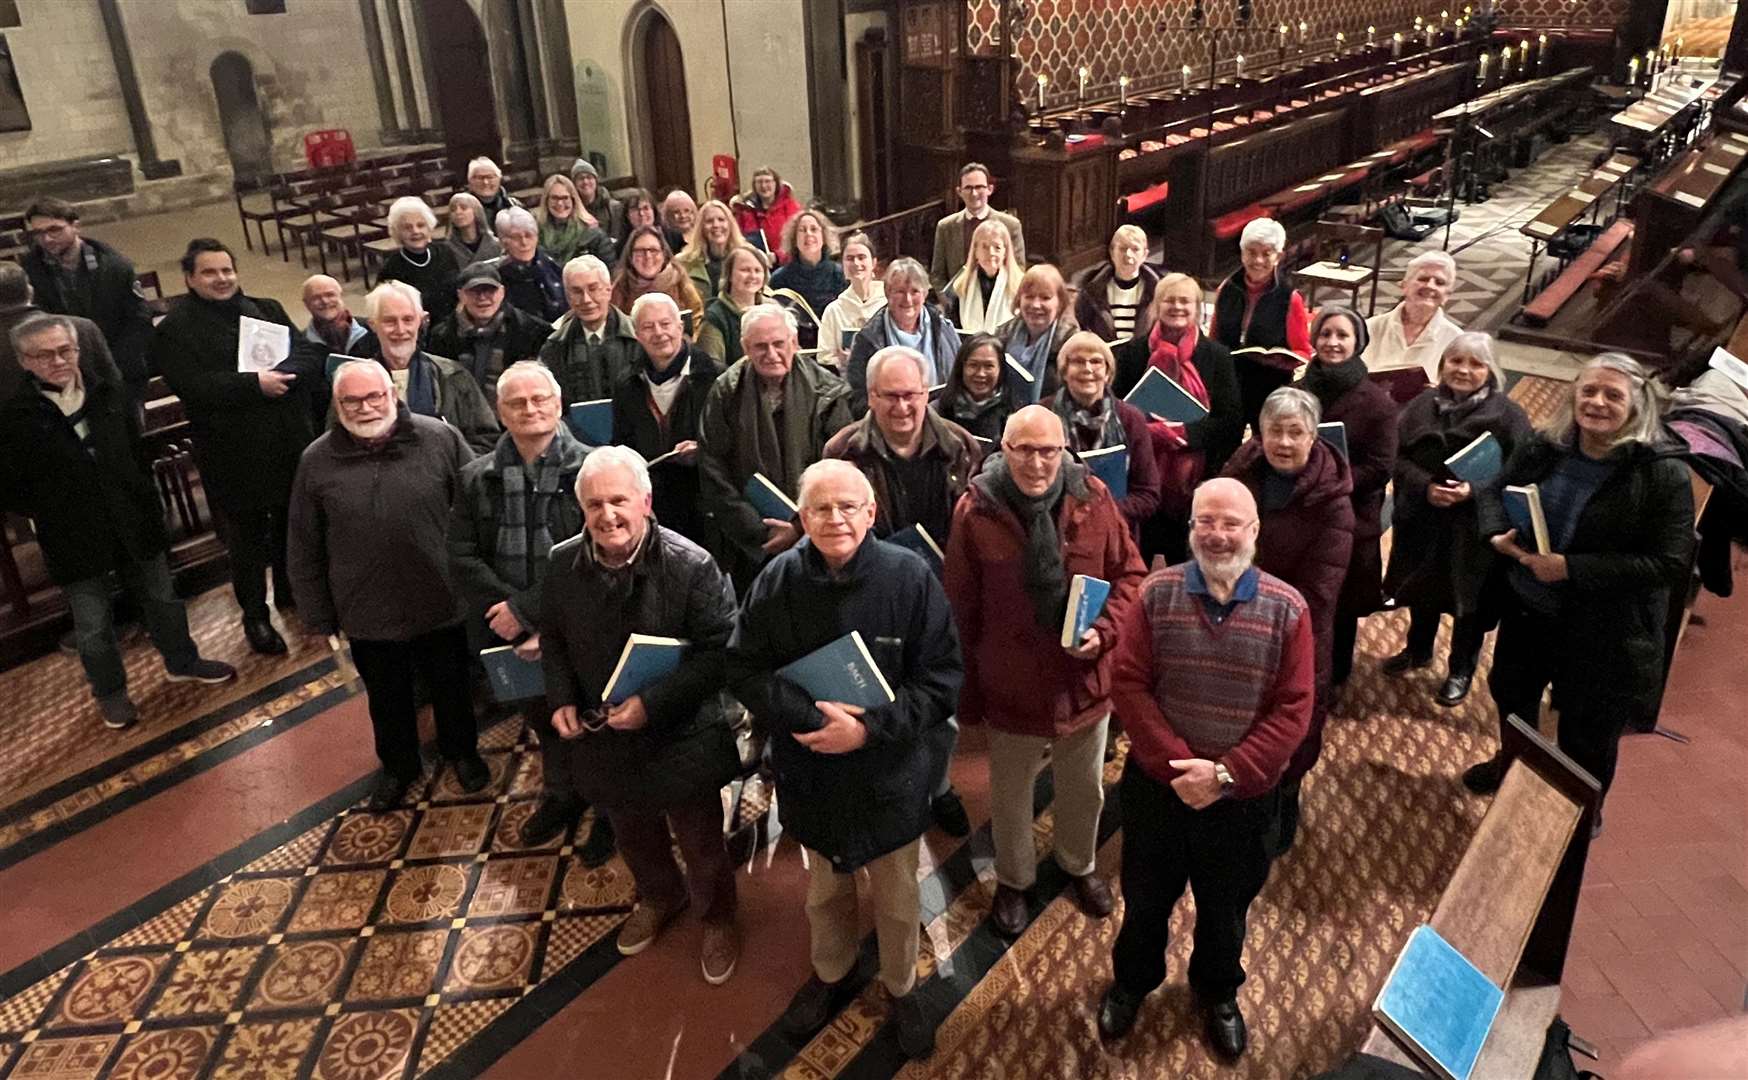 Rochester Choral Society members were involved in the recording